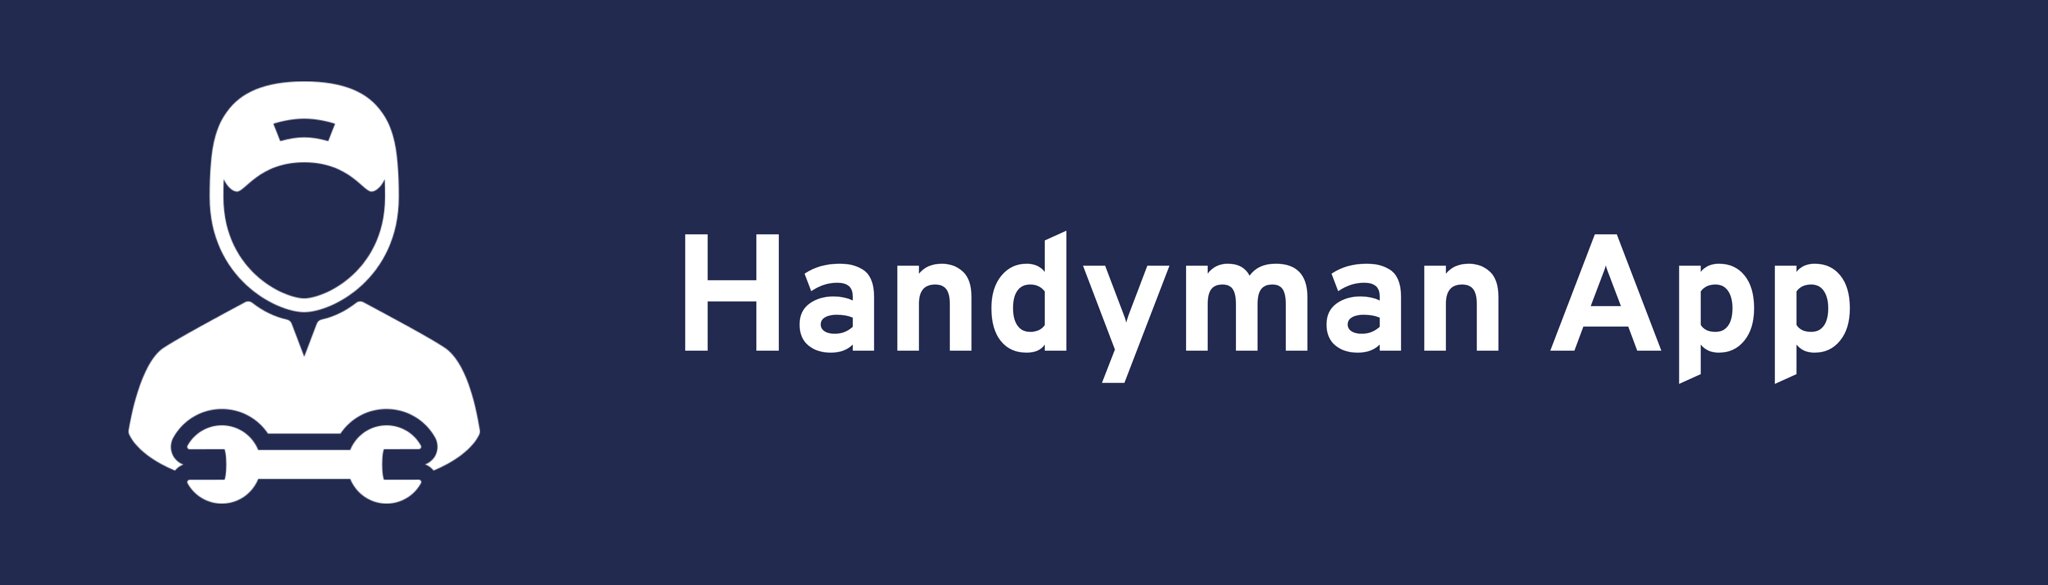 Handy service - On-Demand Home Services, Business Listing, Handyman Booking iOS App with Admin Panel - 24